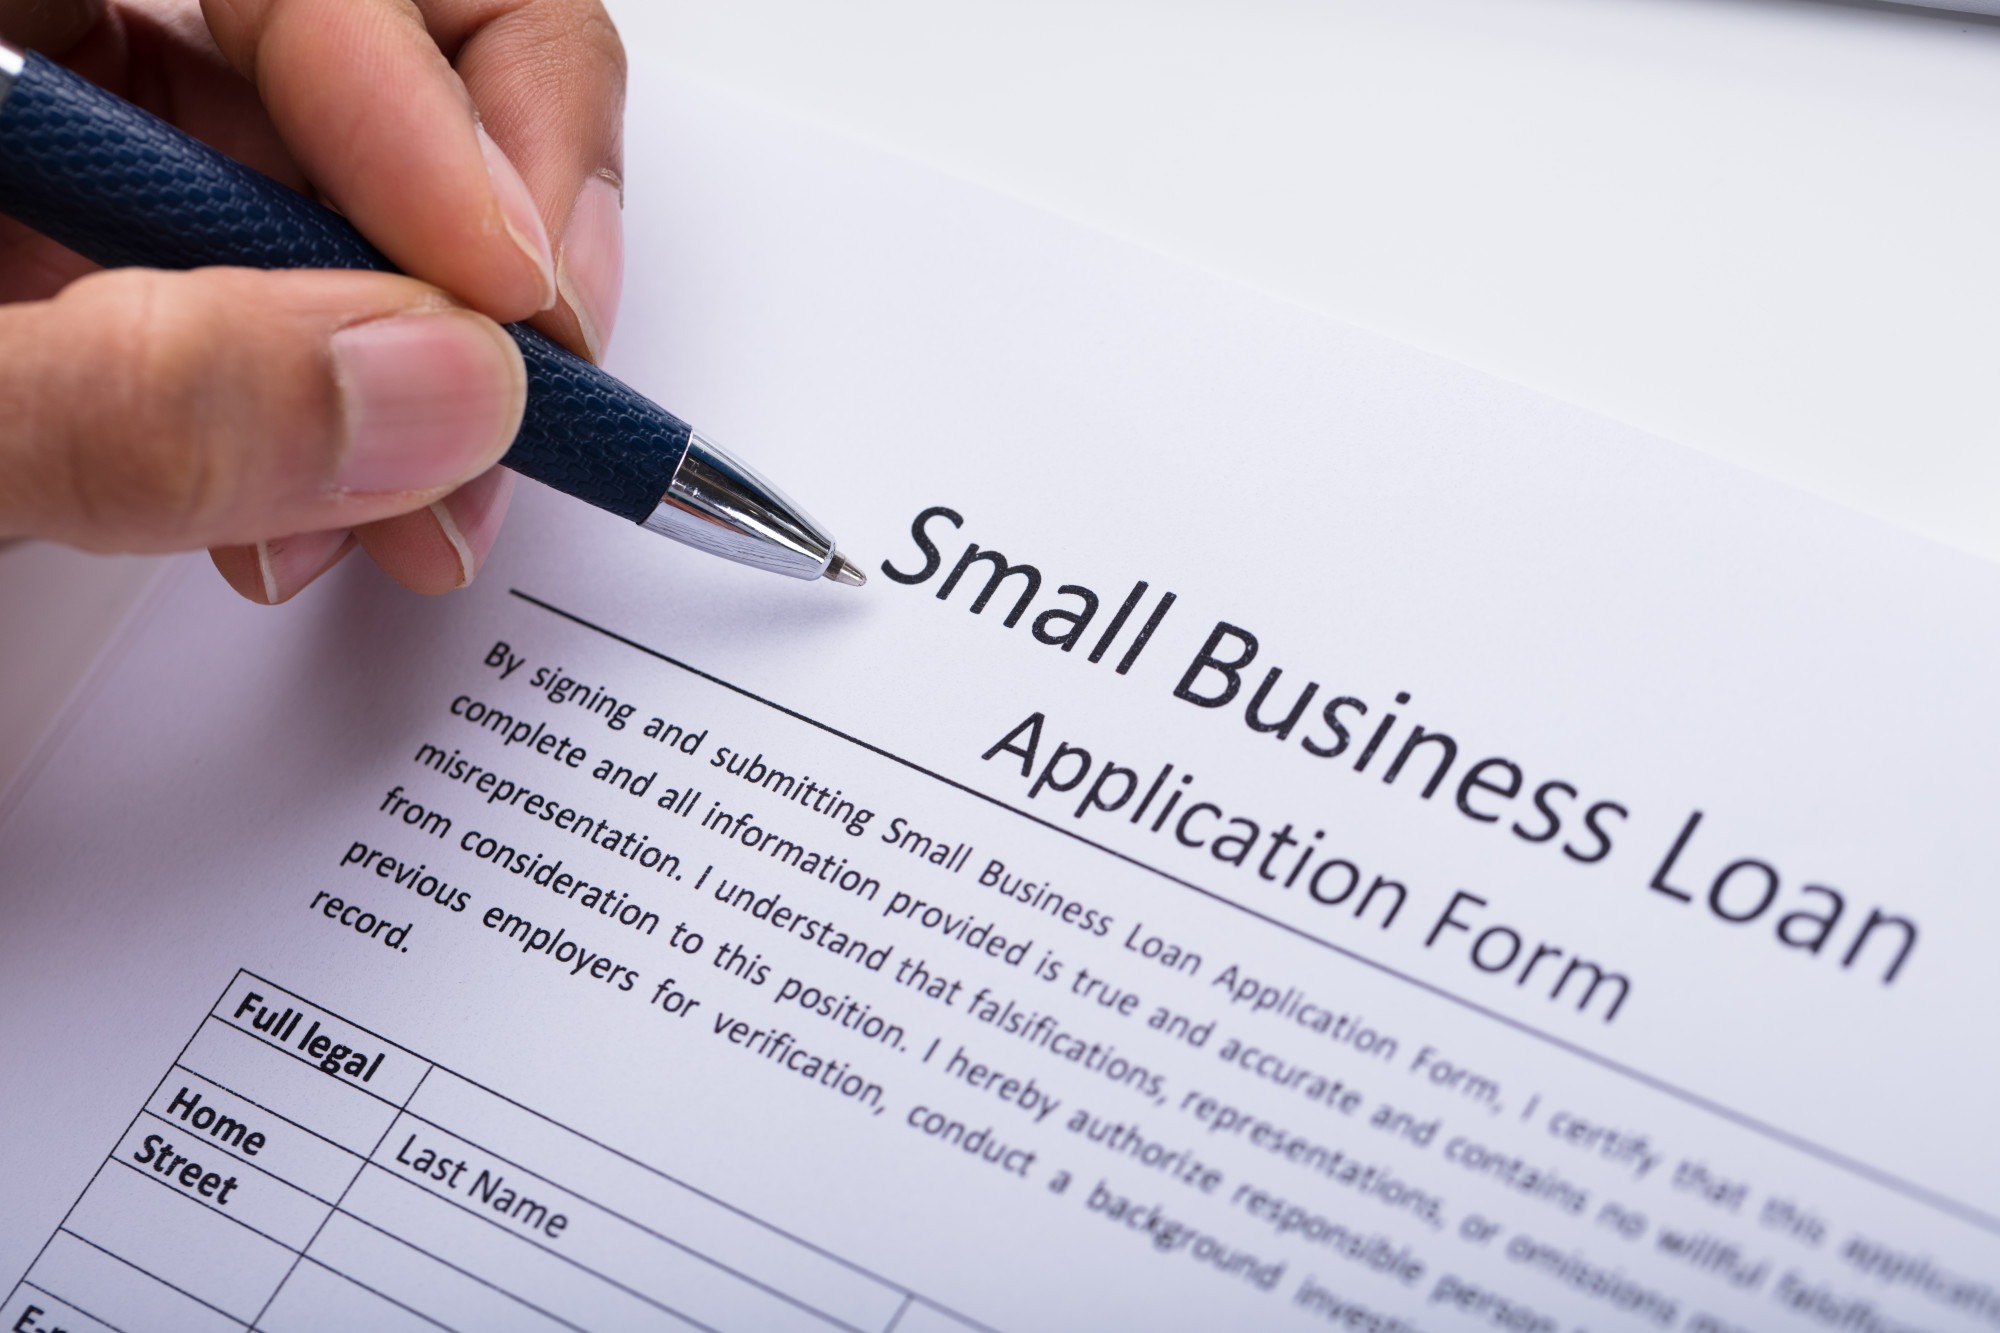 10 Reasons for Startup Businesses to Apply for SBA Loans